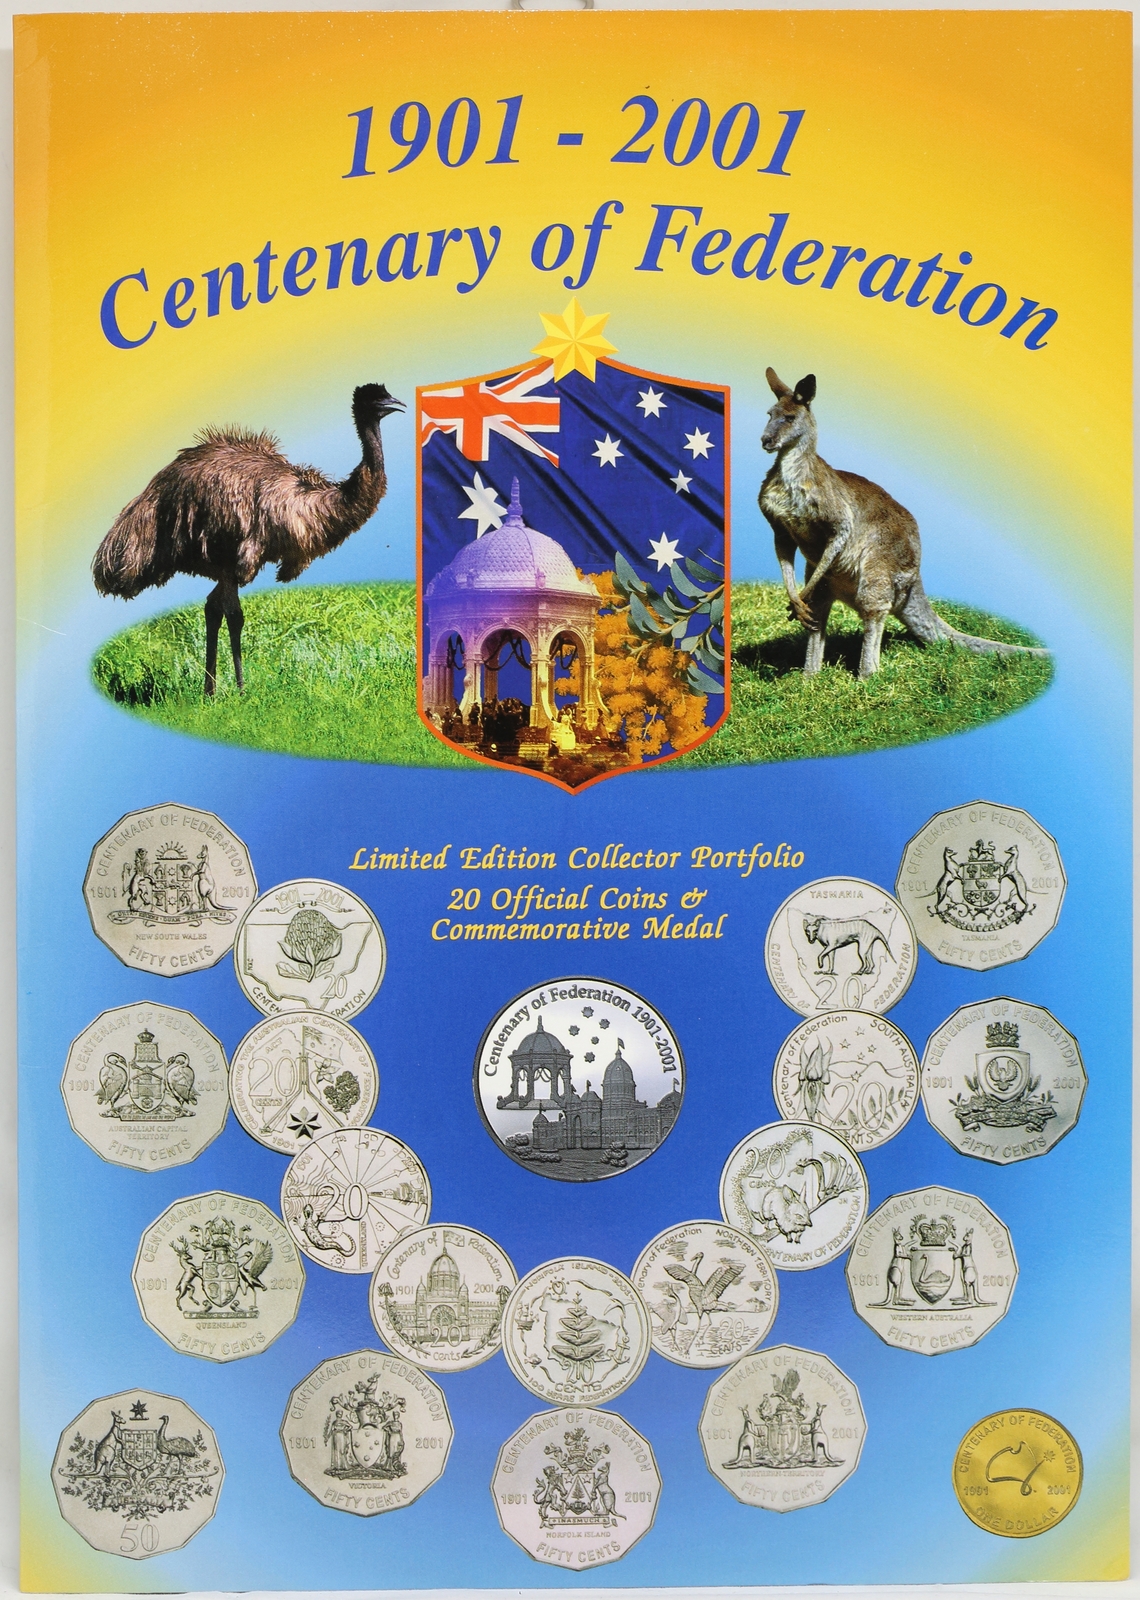 2001 Centenary of Federation Unofficial 20 Coin Set Uncirculated product image